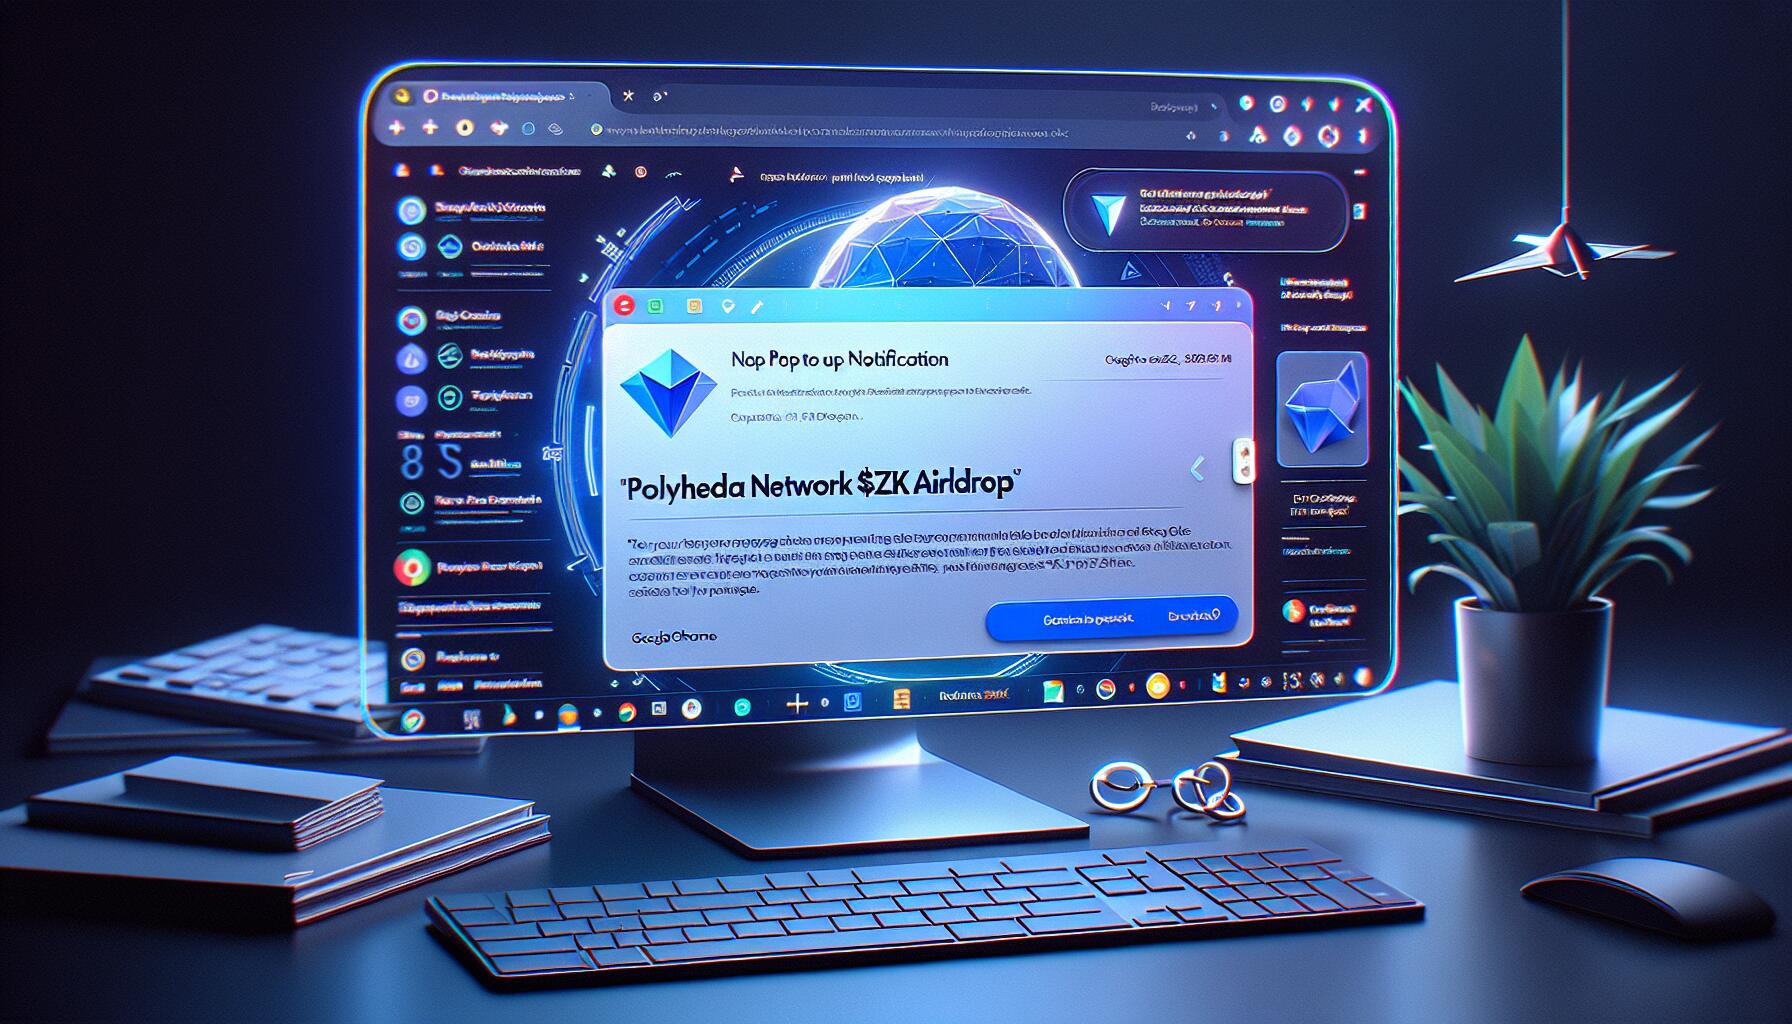 polyhedra network $zk airdrop ads